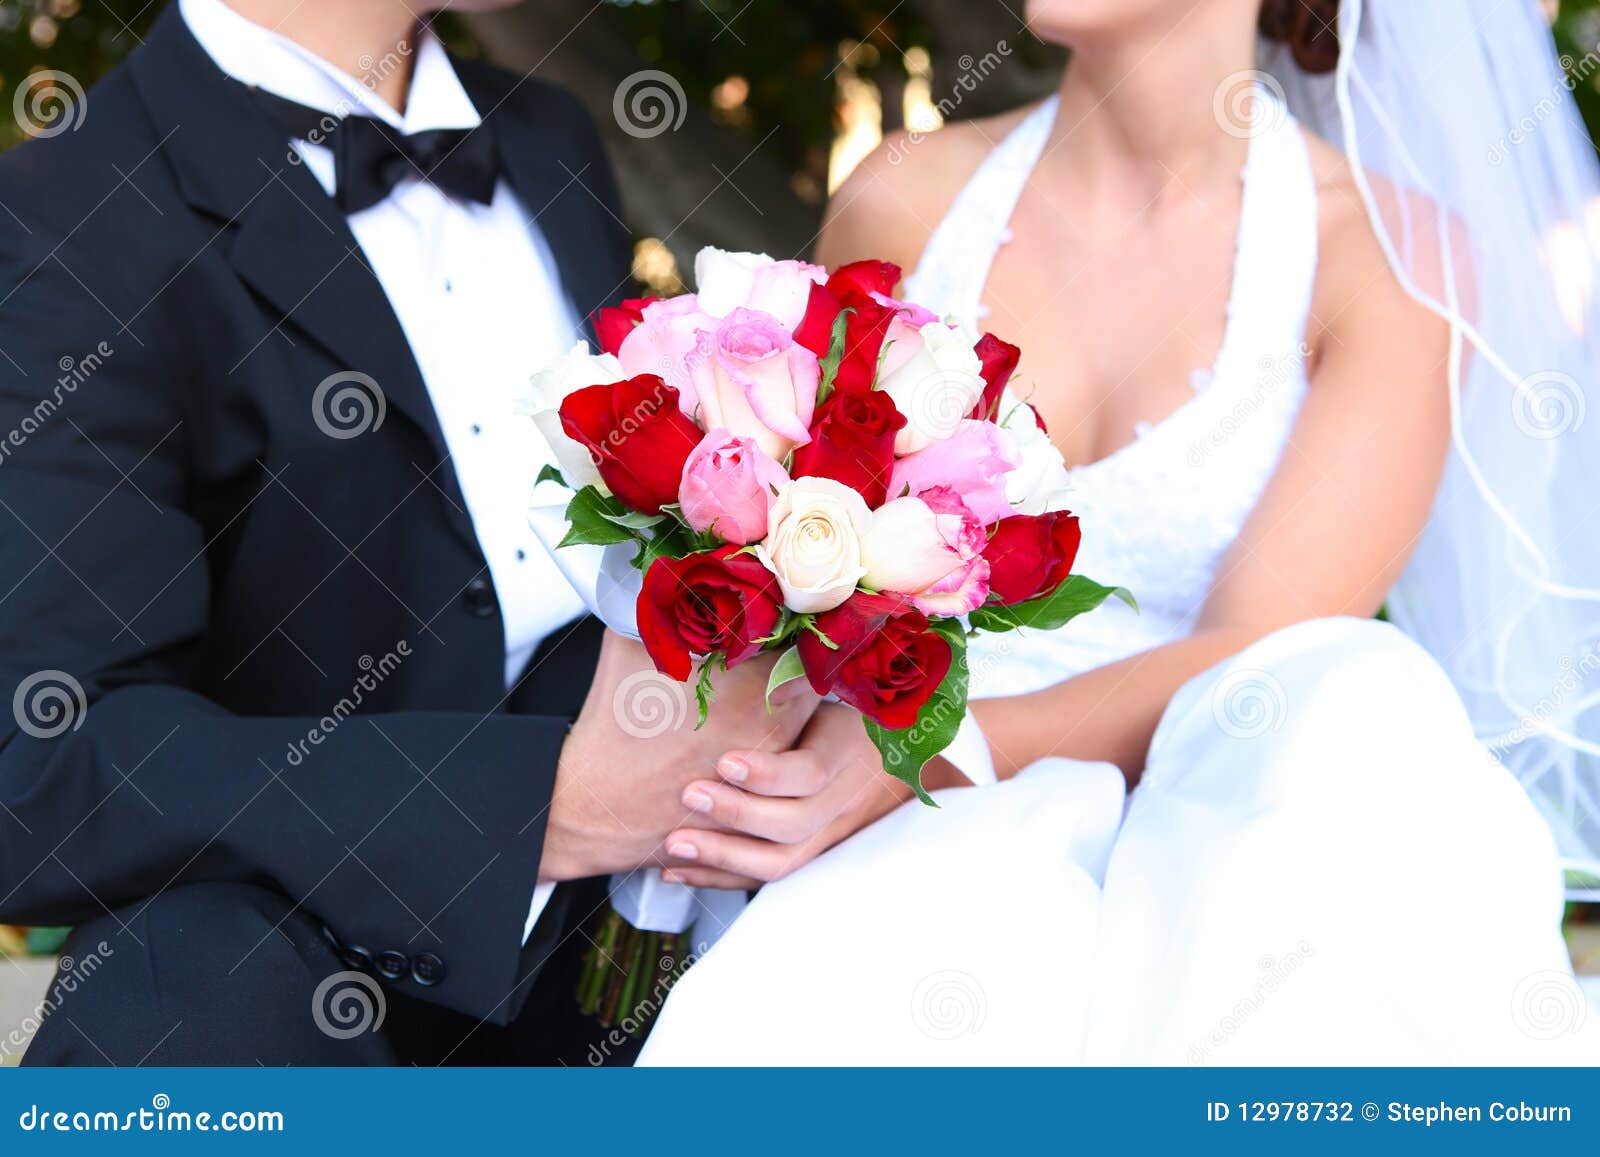 Bride and Groom with Wedding Flowers Stock Photo - Image of evening ...